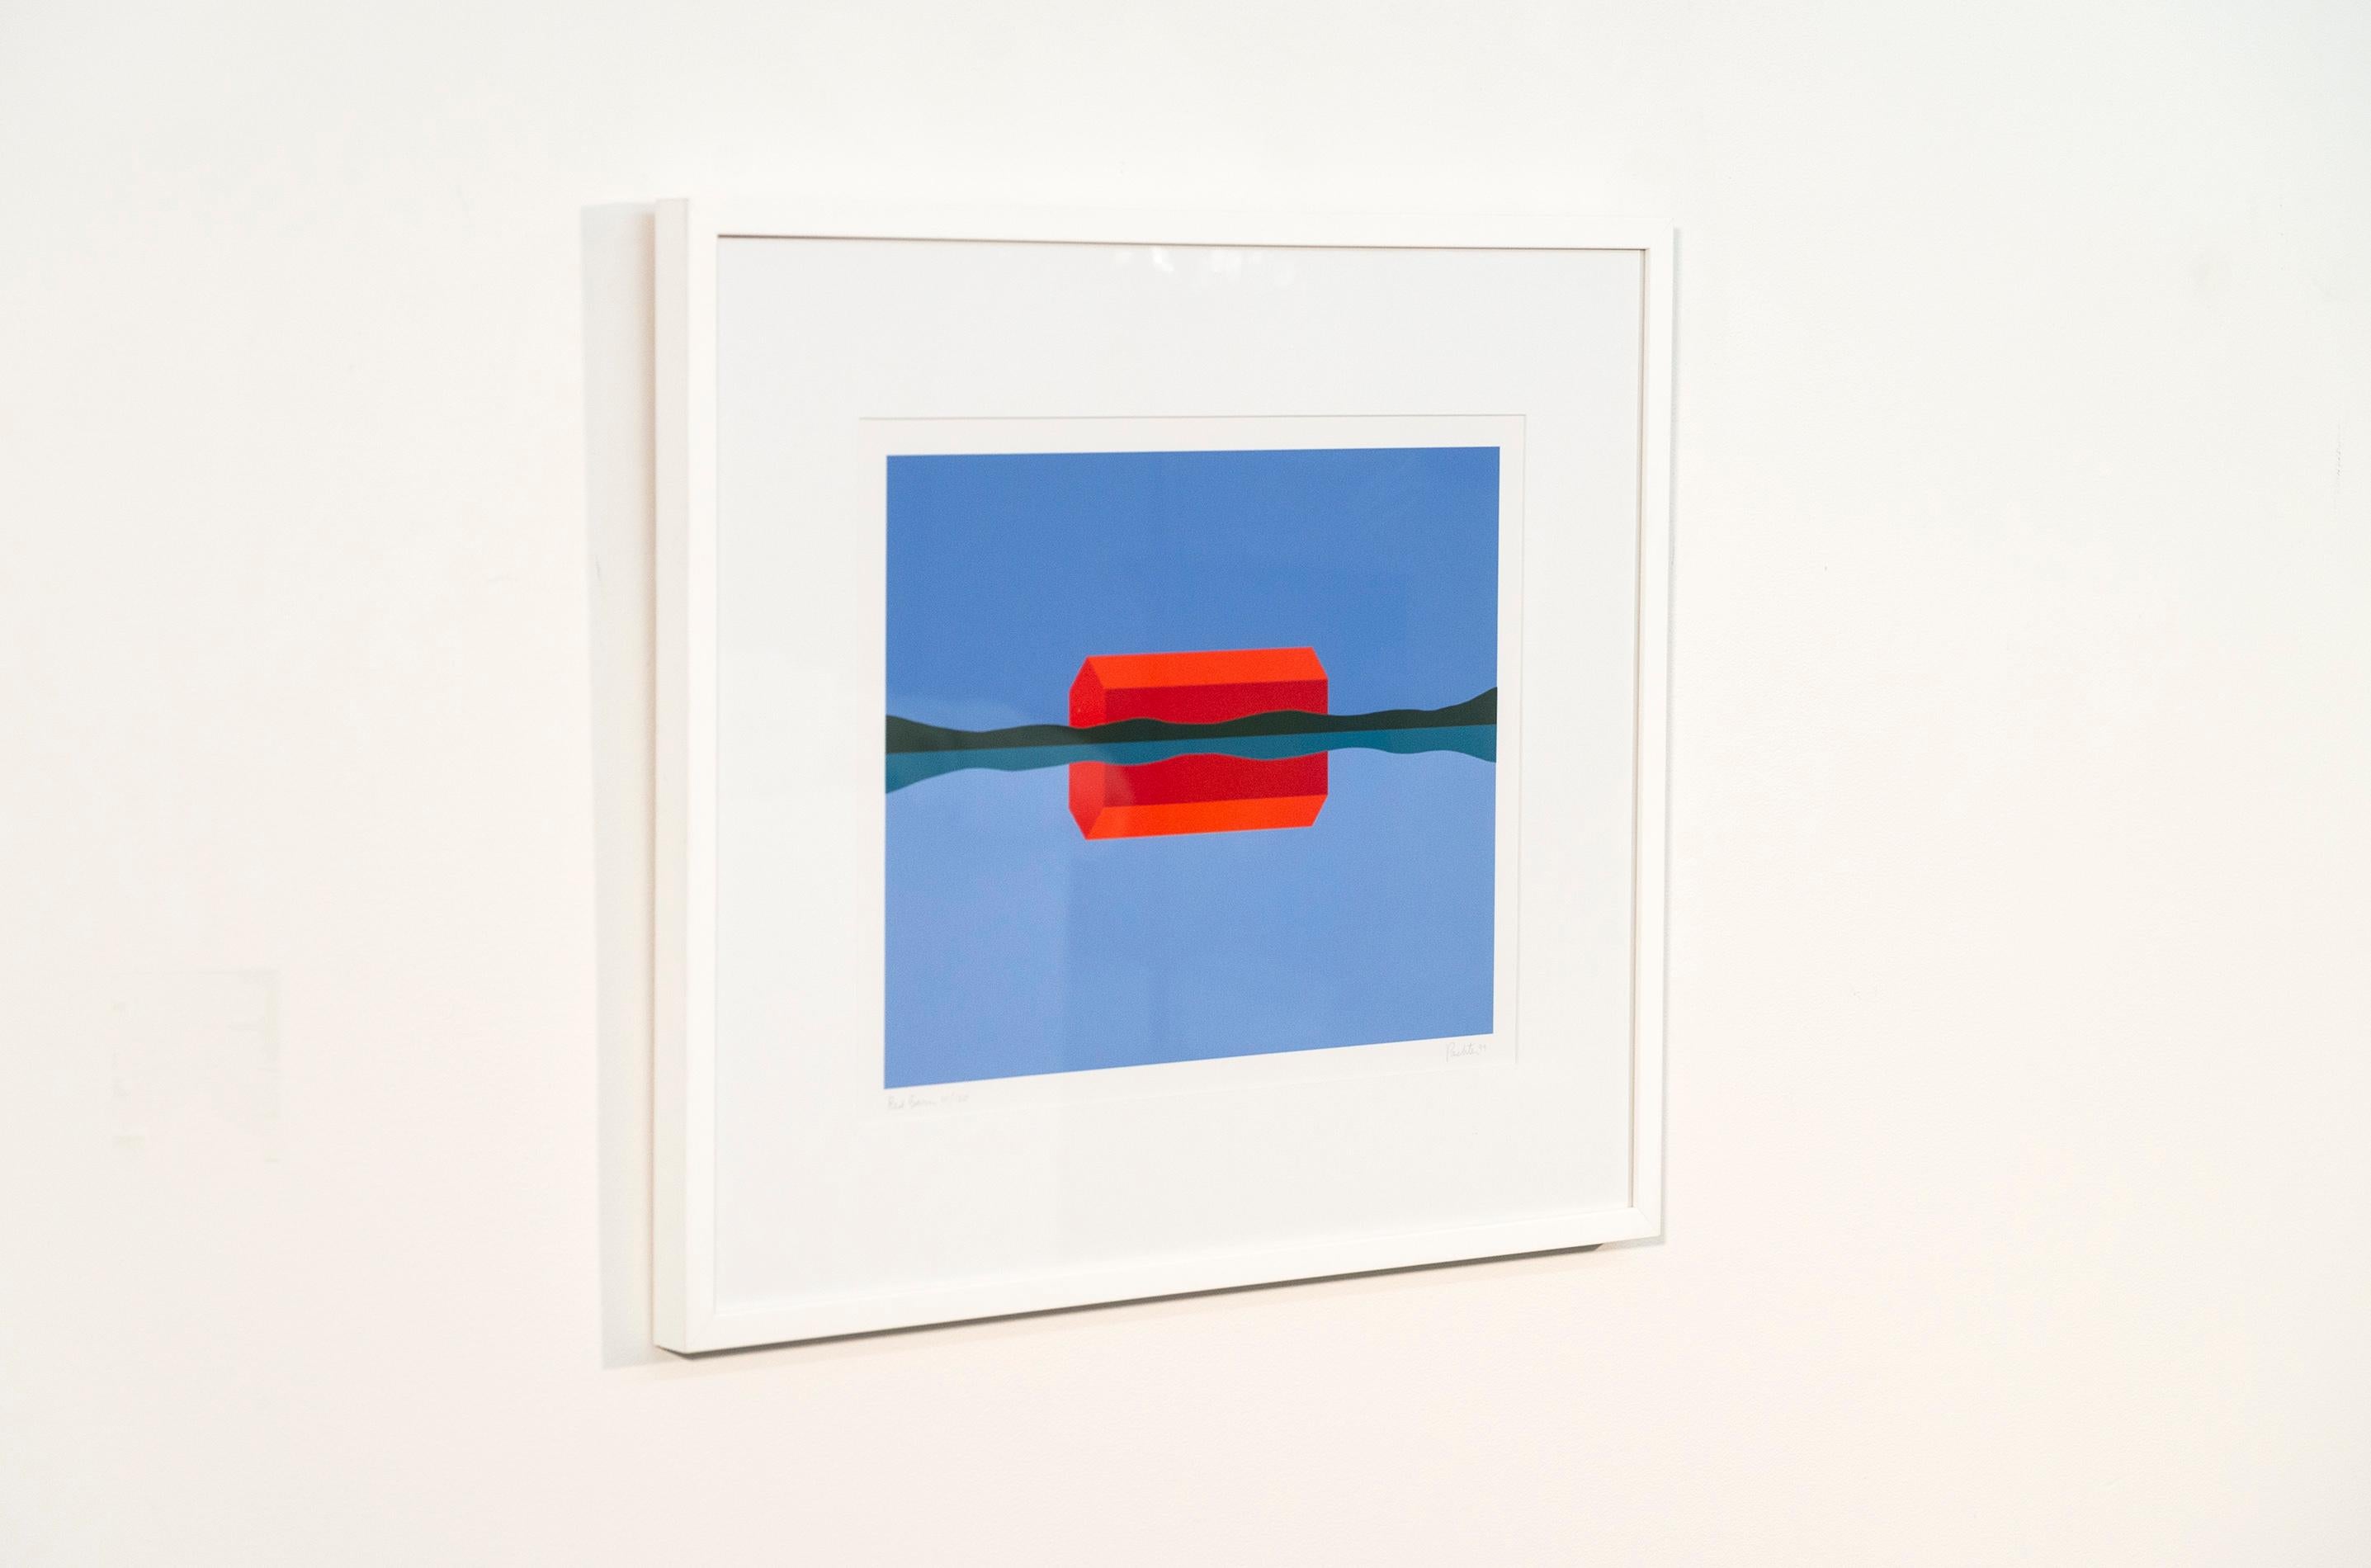 Framed dimensions are 24.5 H x 28.75 in

Charles Pachter’s elegant contemporary paintings of barns pay homage to Canada’s rural roots and strong agricultural heritage. In this limited-edition serigraph, the clean lines of a bright red barn, its